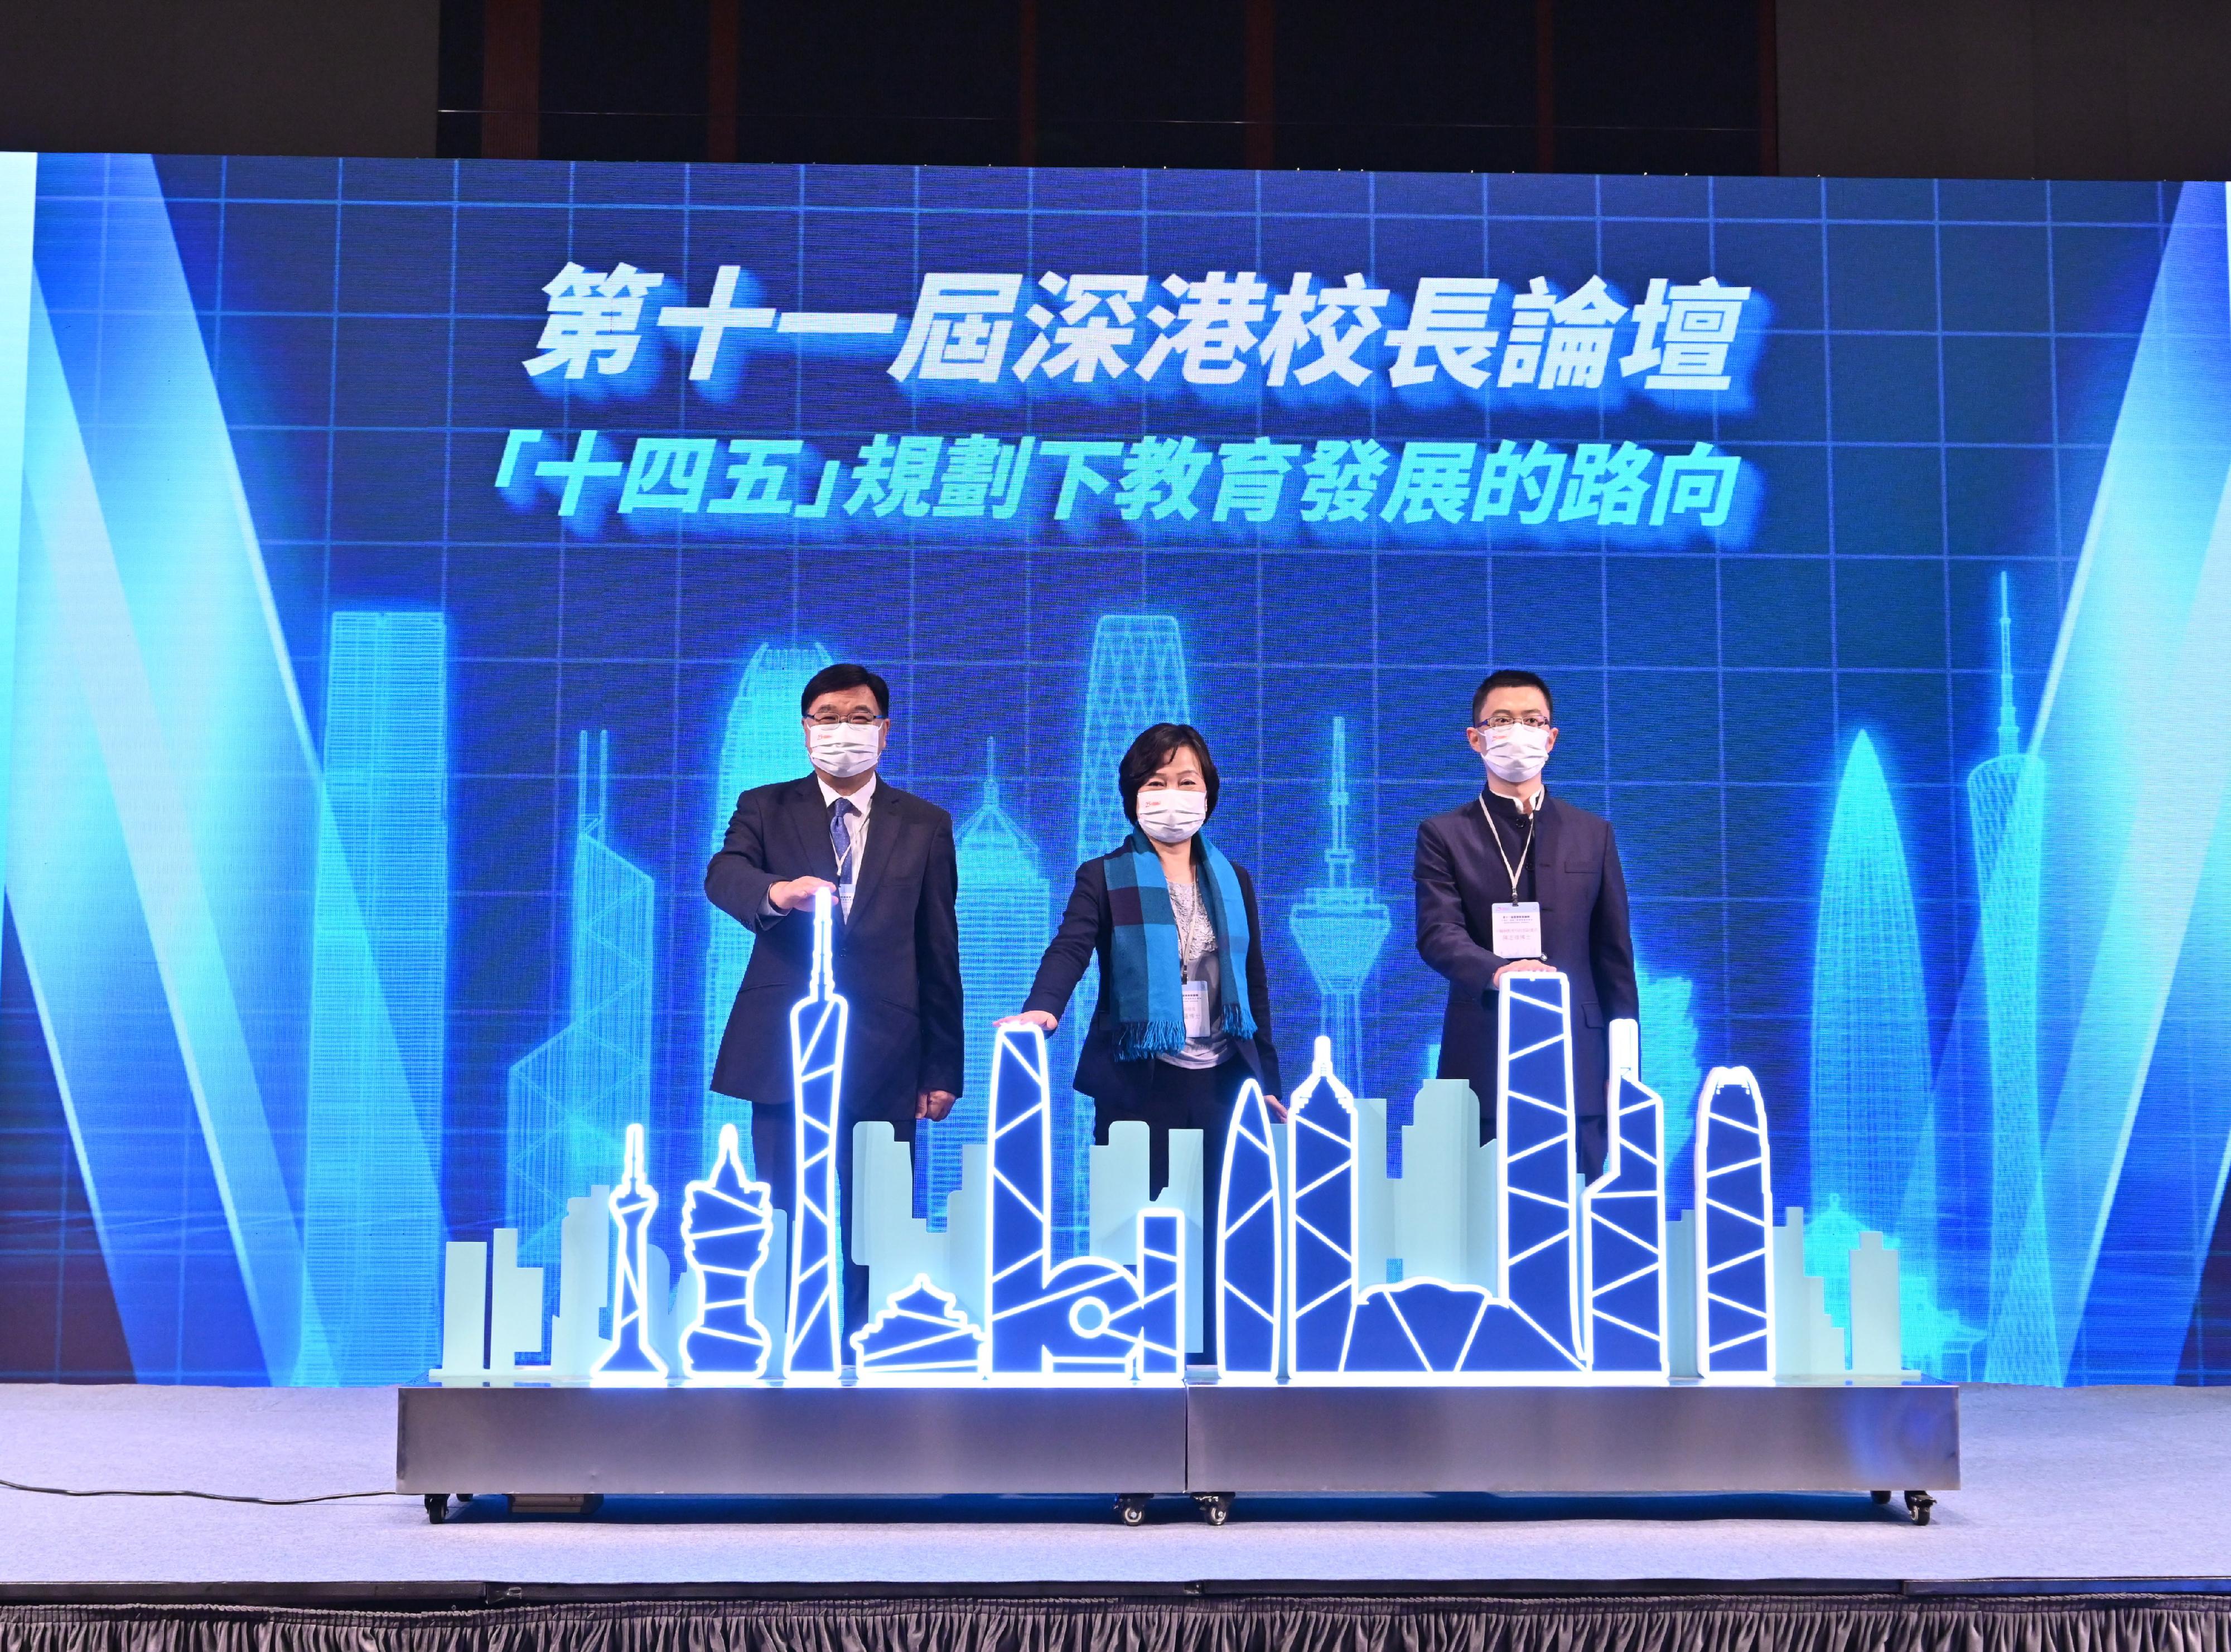 The Secretary for Education, Dr Choi Yuk-lin (centre), officiates at the opening ceremony of the "Shenzhen-Hong Kong Principals' Forum cum Celebration of the 25th Anniversary of Establishment of the Hong Kong Special Administrative Region" with the Deputy Division Director of the Department of Educational, Scientific and Technological Affairs of the Liaison Office of the Central People's Government in the Hong Kong Special Administrative Region, Dr Chen Zhilu (right), and the Chairman of the Research Grants Council and Emeritus President of the Hong Kong Metropolitan University, Professor Wong Yuk-shan, today (November 17).